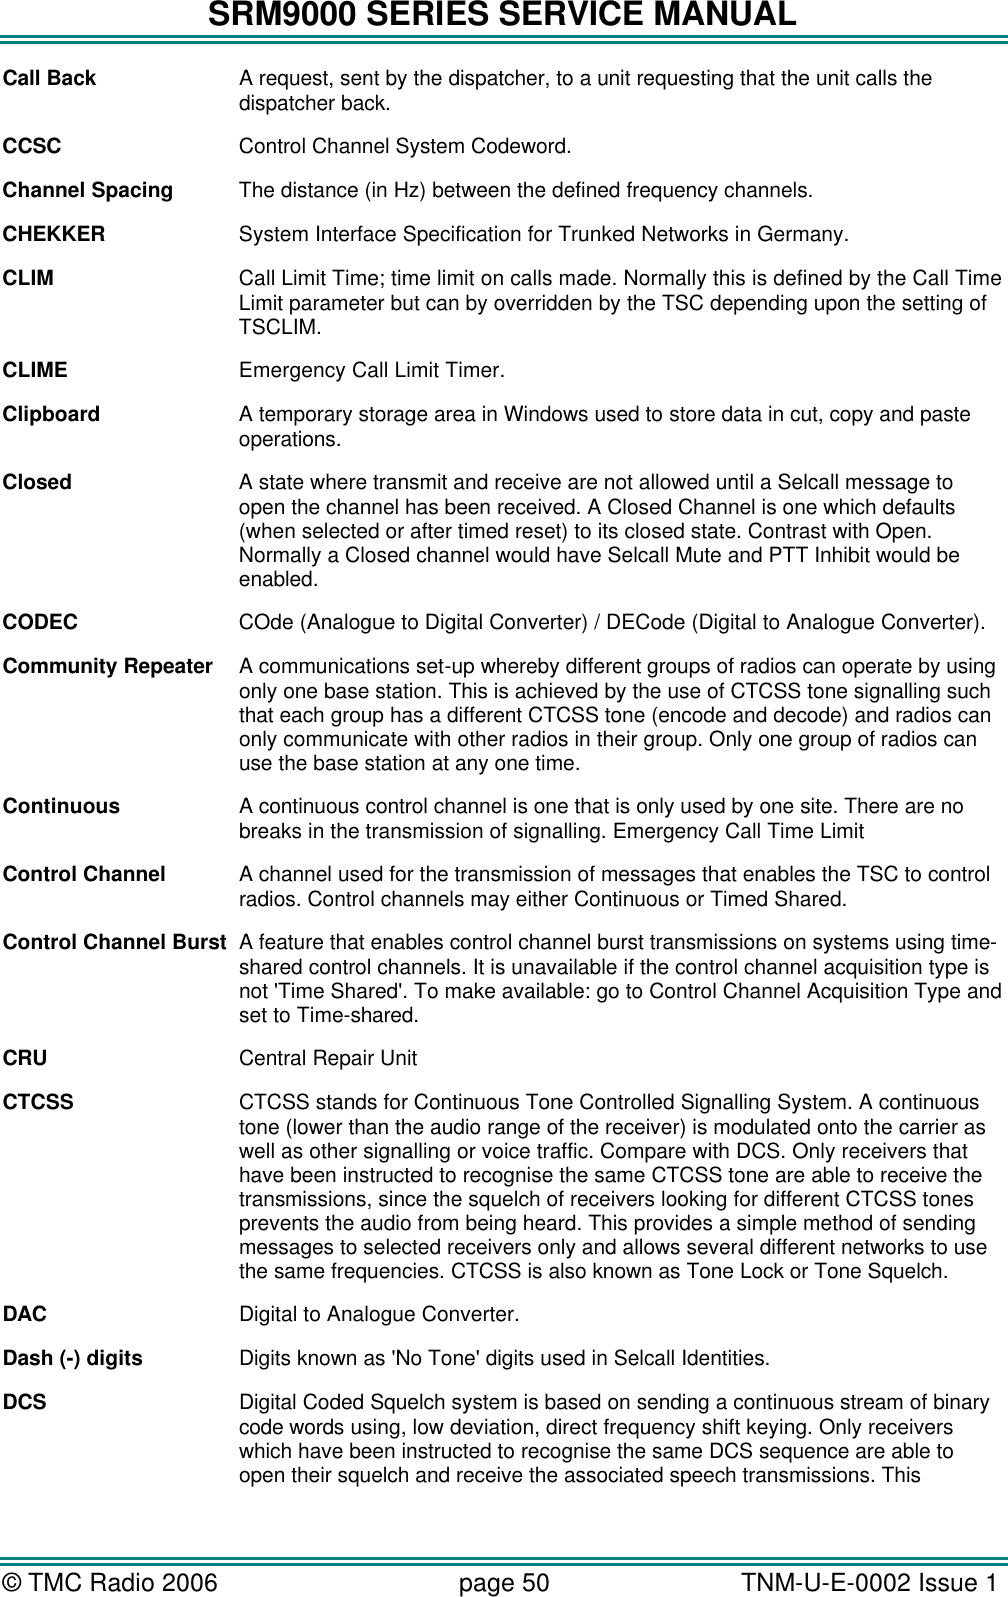 SRM9000 SERIES SERVICE MANUAL © TMC Radio 2006 page 50   TNM-U-E-0002 Issue 1  Call Back A request, sent by the dispatcher, to a unit requesting that the unit calls the dispatcher back. CCSC    Control Channel System Codeword.   Channel Spacing The distance (in Hz) between the defined frequency channels.  CHEKKER System Interface Specification for Trunked Networks in Germany. CLIM Call Limit Time; time limit on calls made. Normally this is defined by the Call Time Limit parameter but can by overridden by the TSC depending upon the setting of TSCLIM. CLIME Emergency Call Limit Timer. Clipboard A temporary storage area in Windows used to store data in cut, copy and paste operations. Closed A state where transmit and receive are not allowed until a Selcall message to open the channel has been received. A Closed Channel is one which defaults (when selected or after timed reset) to its closed state. Contrast with Open. Normally a Closed channel would have Selcall Mute and PTT Inhibit would be enabled. CODEC COde (Analogue to Digital Converter) / DECode (Digital to Analogue Converter). Community Repeater A communications set-up whereby different groups of radios can operate by using only one base station. This is achieved by the use of CTCSS tone signalling such that each group has a different CTCSS tone (encode and decode) and radios can only communicate with other radios in their group. Only one group of radios can use the base station at any one time. Continuous A continuous control channel is one that is only used by one site. There are no breaks in the transmission of signalling. Emergency Call Time Limit Control Channel  A channel used for the transmission of messages that enables the TSC to control radios. Control channels may either Continuous or Timed Shared. Control Channel Burst A feature that enables control channel burst transmissions on systems using time-shared control channels. It is unavailable if the control channel acquisition type is not &apos;Time Shared&apos;. To make available: go to Control Channel Acquisition Type and set to Time-shared. CRU    Central Repair Unit CTCSS CTCSS stands for Continuous Tone Controlled Signalling System. A continuous tone (lower than the audio range of the receiver) is modulated onto the carrier as well as other signalling or voice traffic. Compare with DCS. Only receivers that have been instructed to recognise the same CTCSS tone are able to receive the transmissions, since the squelch of receivers looking for different CTCSS tones prevents the audio from being heard. This provides a simple method of sending messages to selected receivers only and allows several different networks to use the same frequencies. CTCSS is also known as Tone Lock or Tone Squelch. DAC Digital to Analogue Converter. Dash (-) digits Digits known as &apos;No Tone&apos; digits used in Selcall Identities. DCS Digital Coded Squelch system is based on sending a continuous stream of binary code words using, low deviation, direct frequency shift keying. Only receivers which have been instructed to recognise the same DCS sequence are able to open their squelch and receive the associated speech transmissions. This 